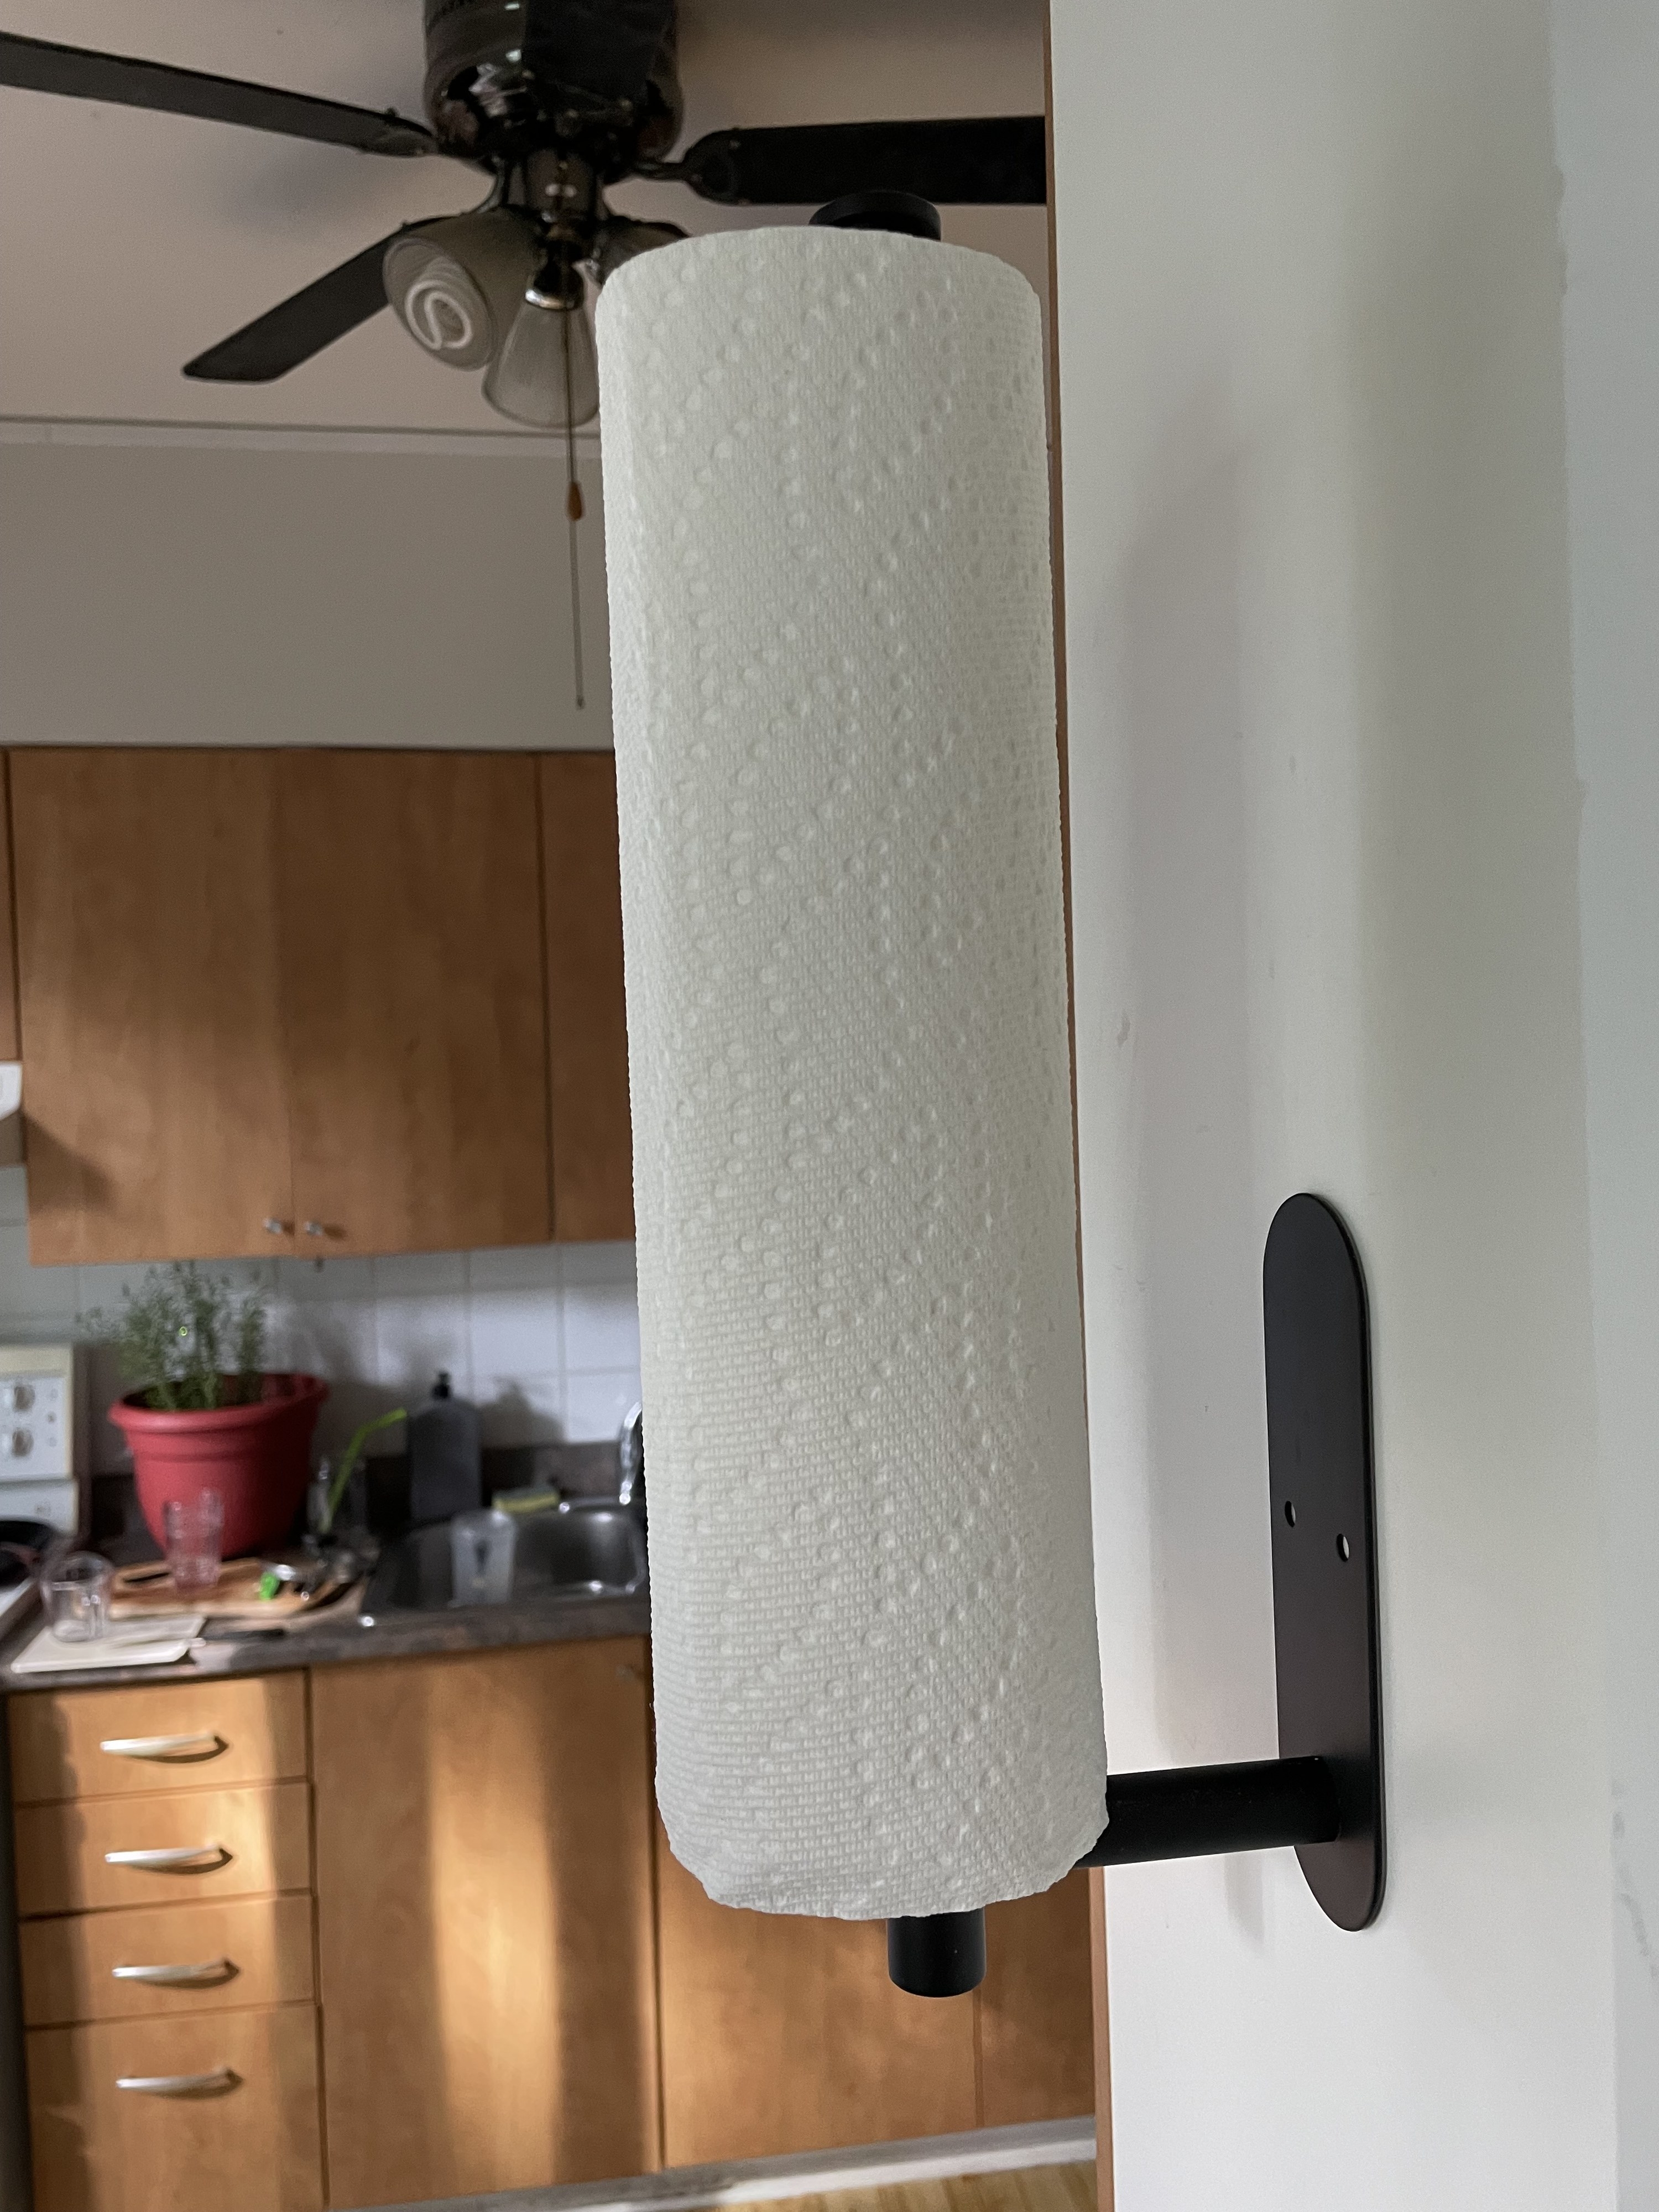 a paper towel roll on a paper towel holder